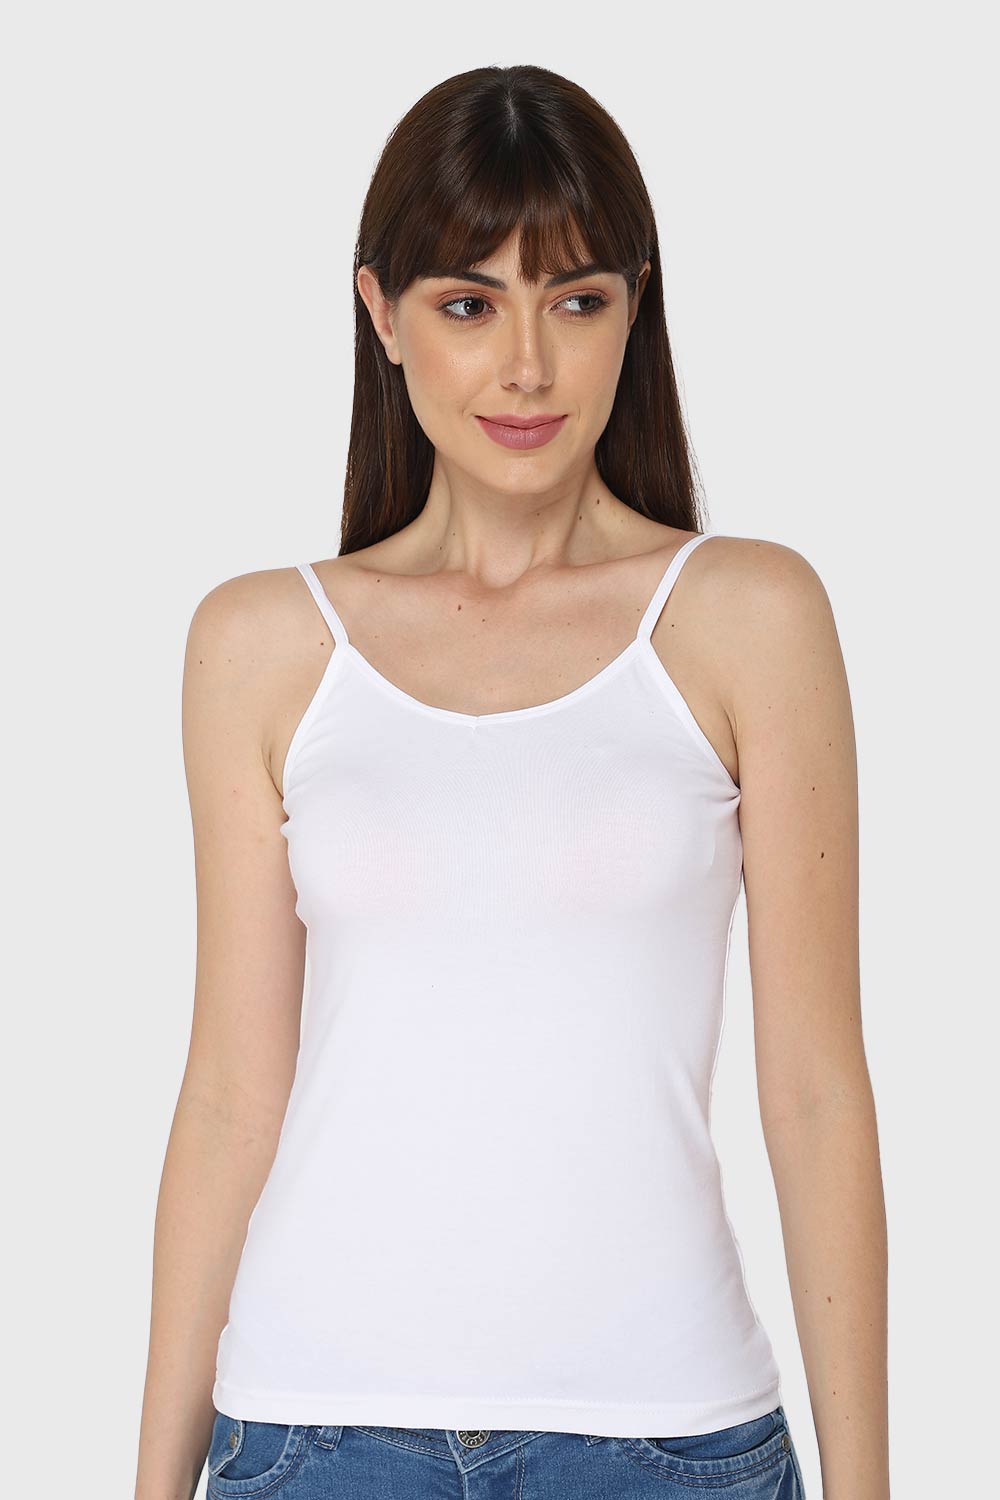 Intimacy Super Stretch Camisole Special Combo Pack - Cl04 - Pack of 3 - C63